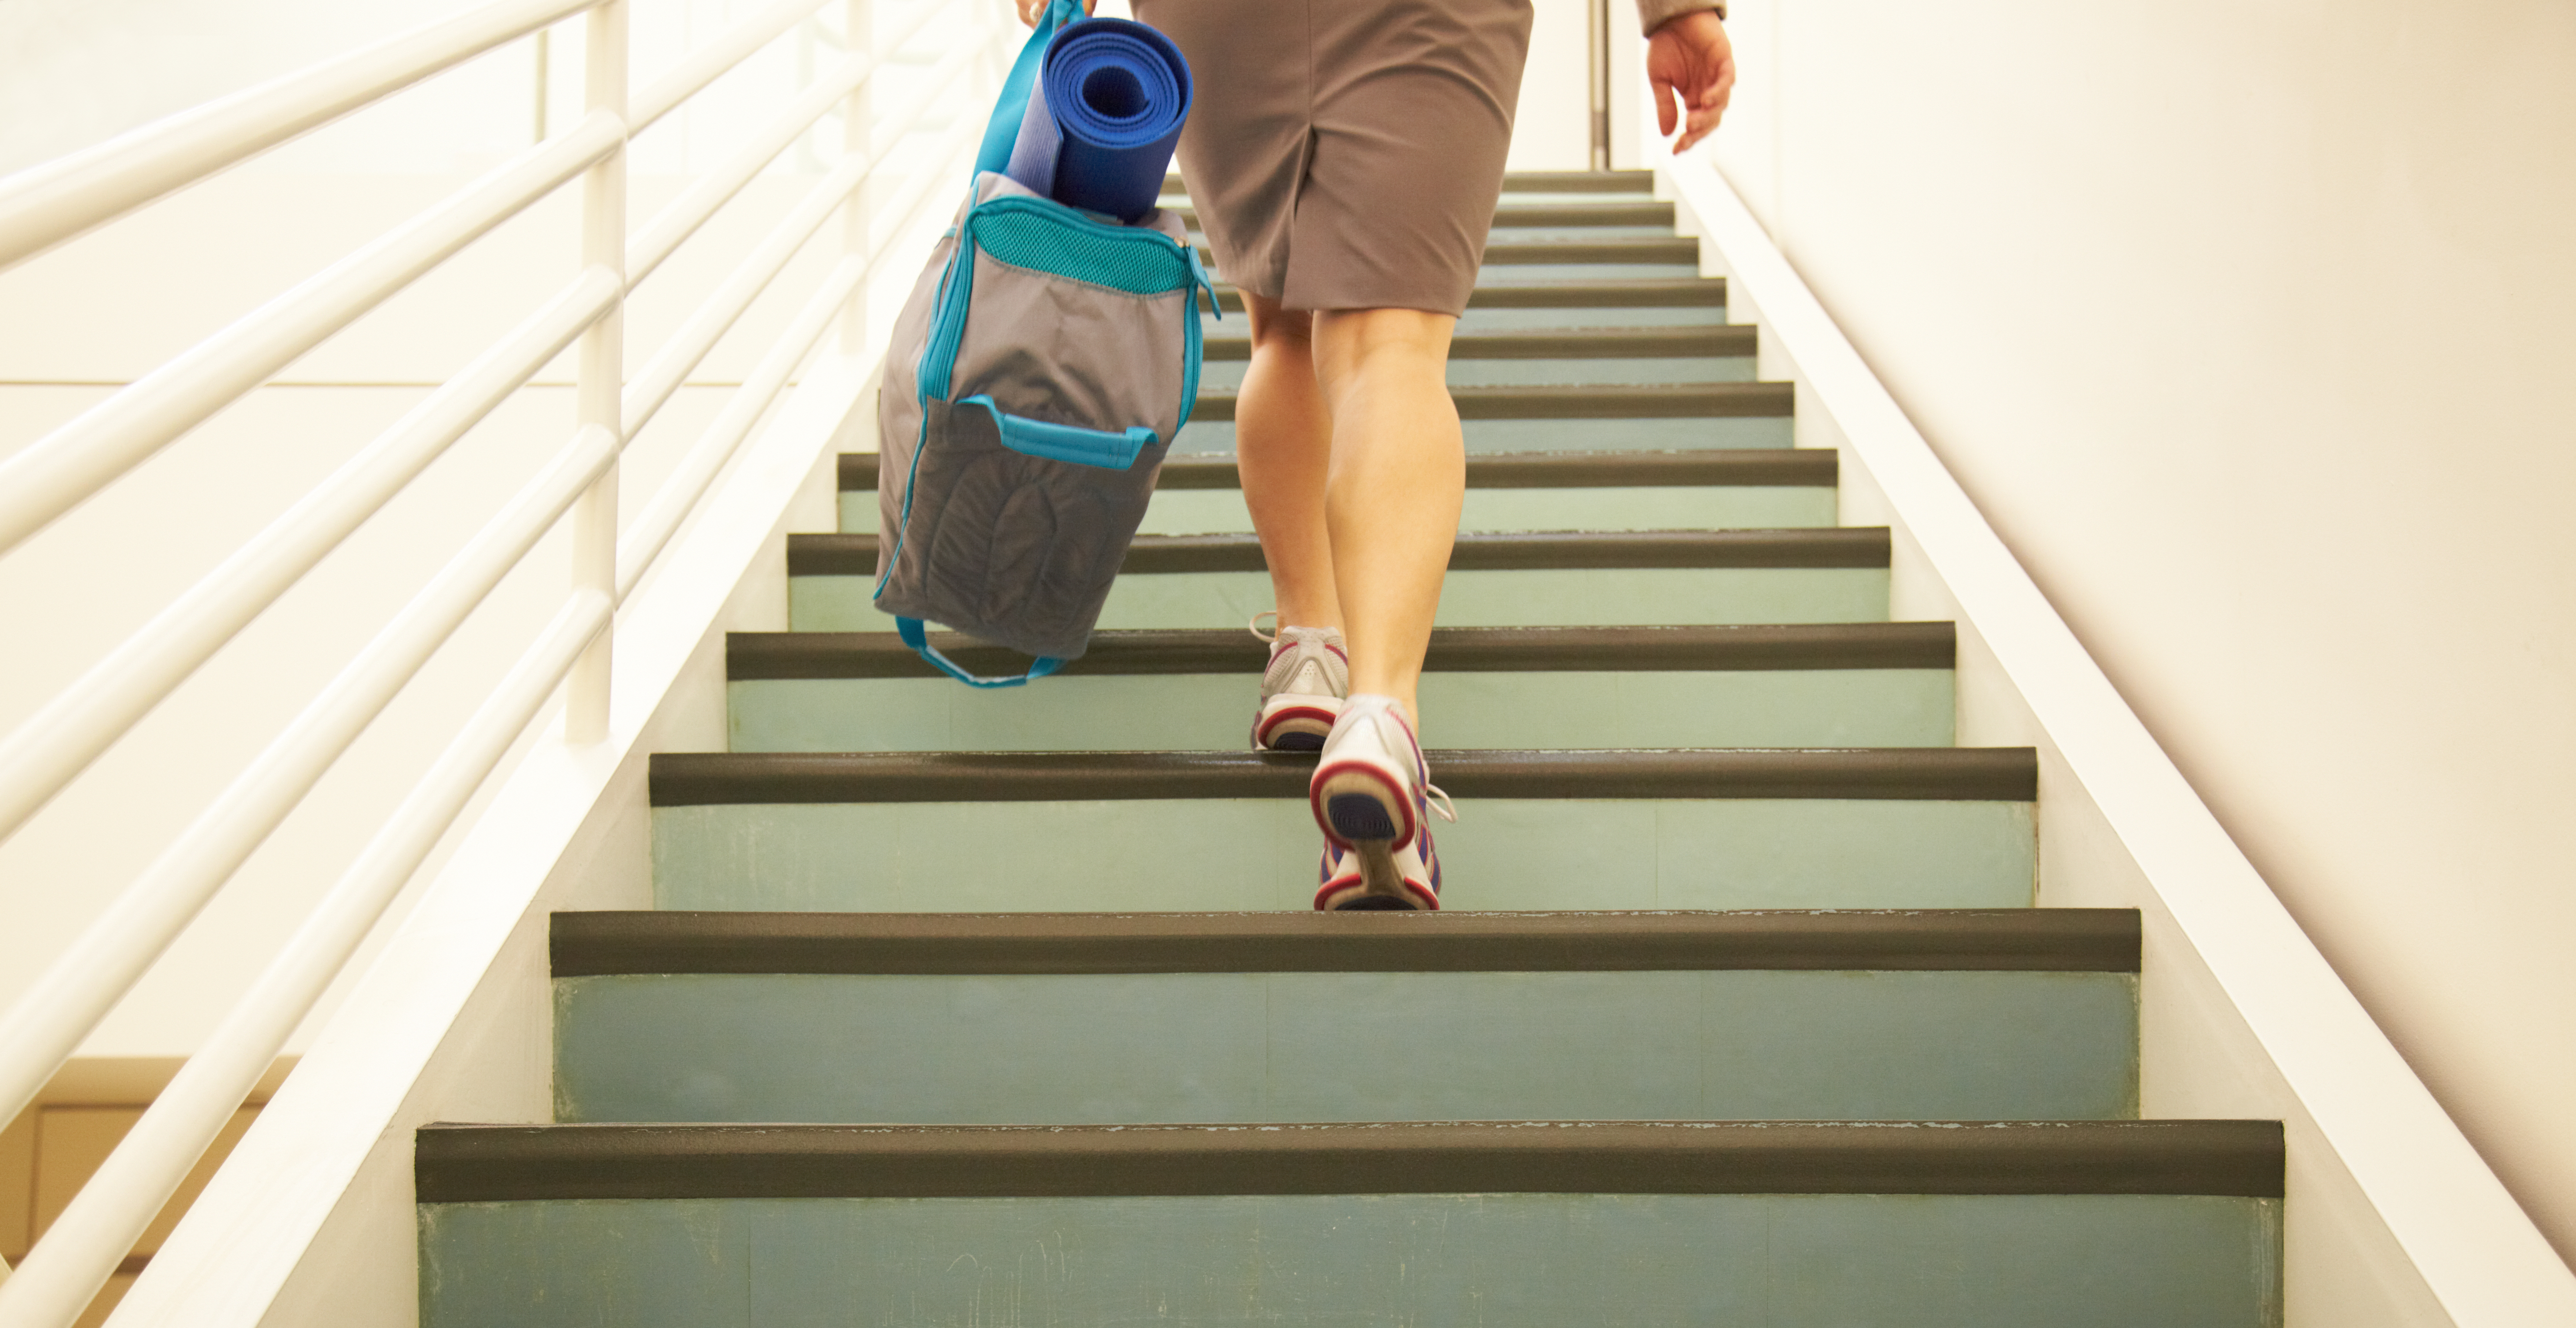 Take the Stairs: The Athlete's Way to Build Leg Strength